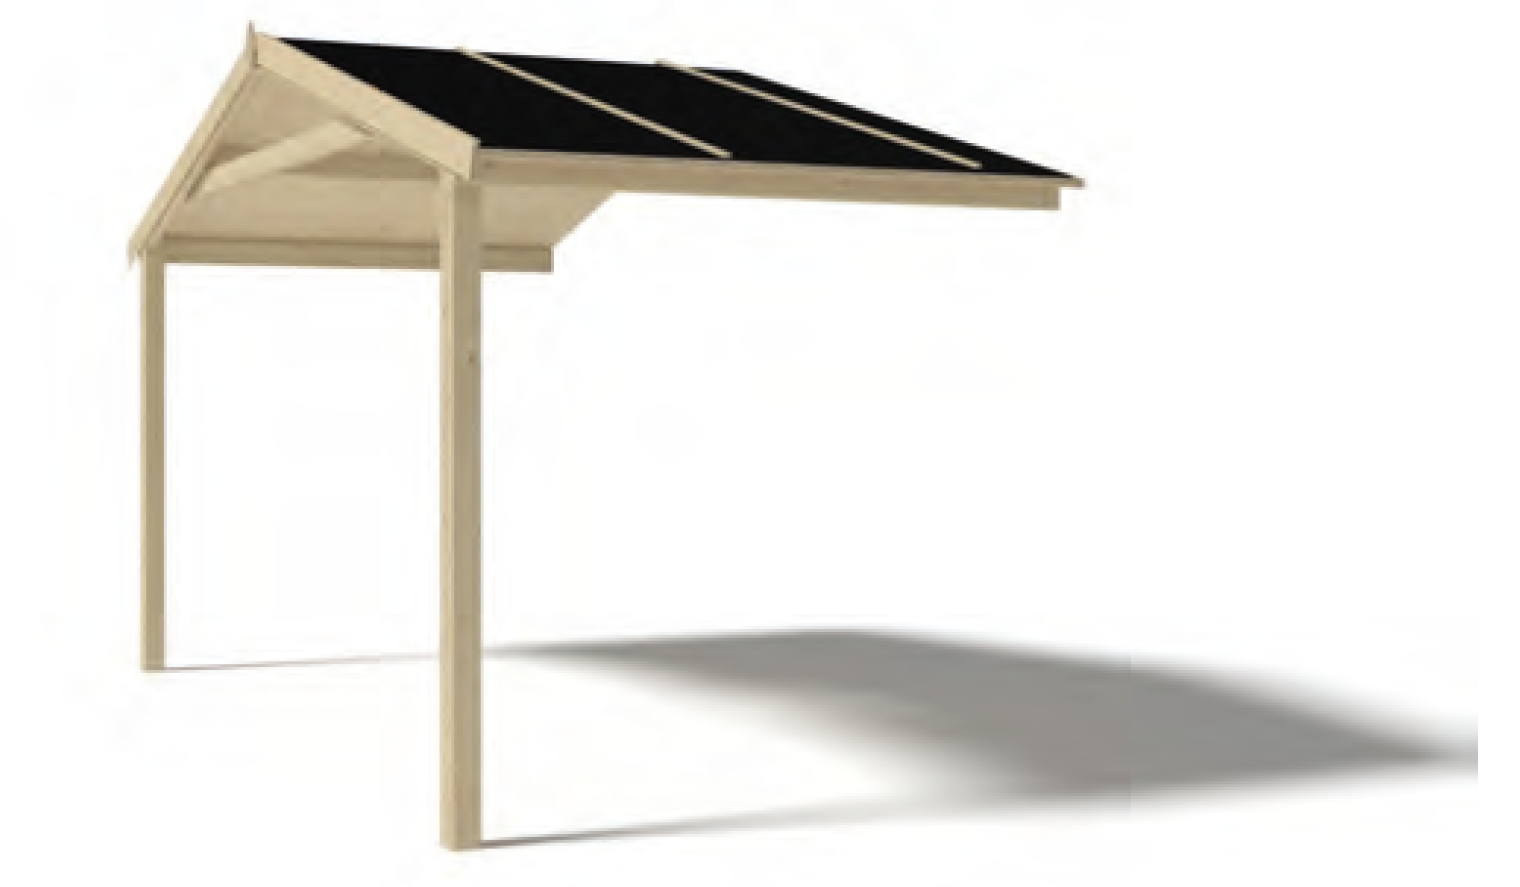 Helsinki roof and balcony for shelter made of wood 400 x 300 cm